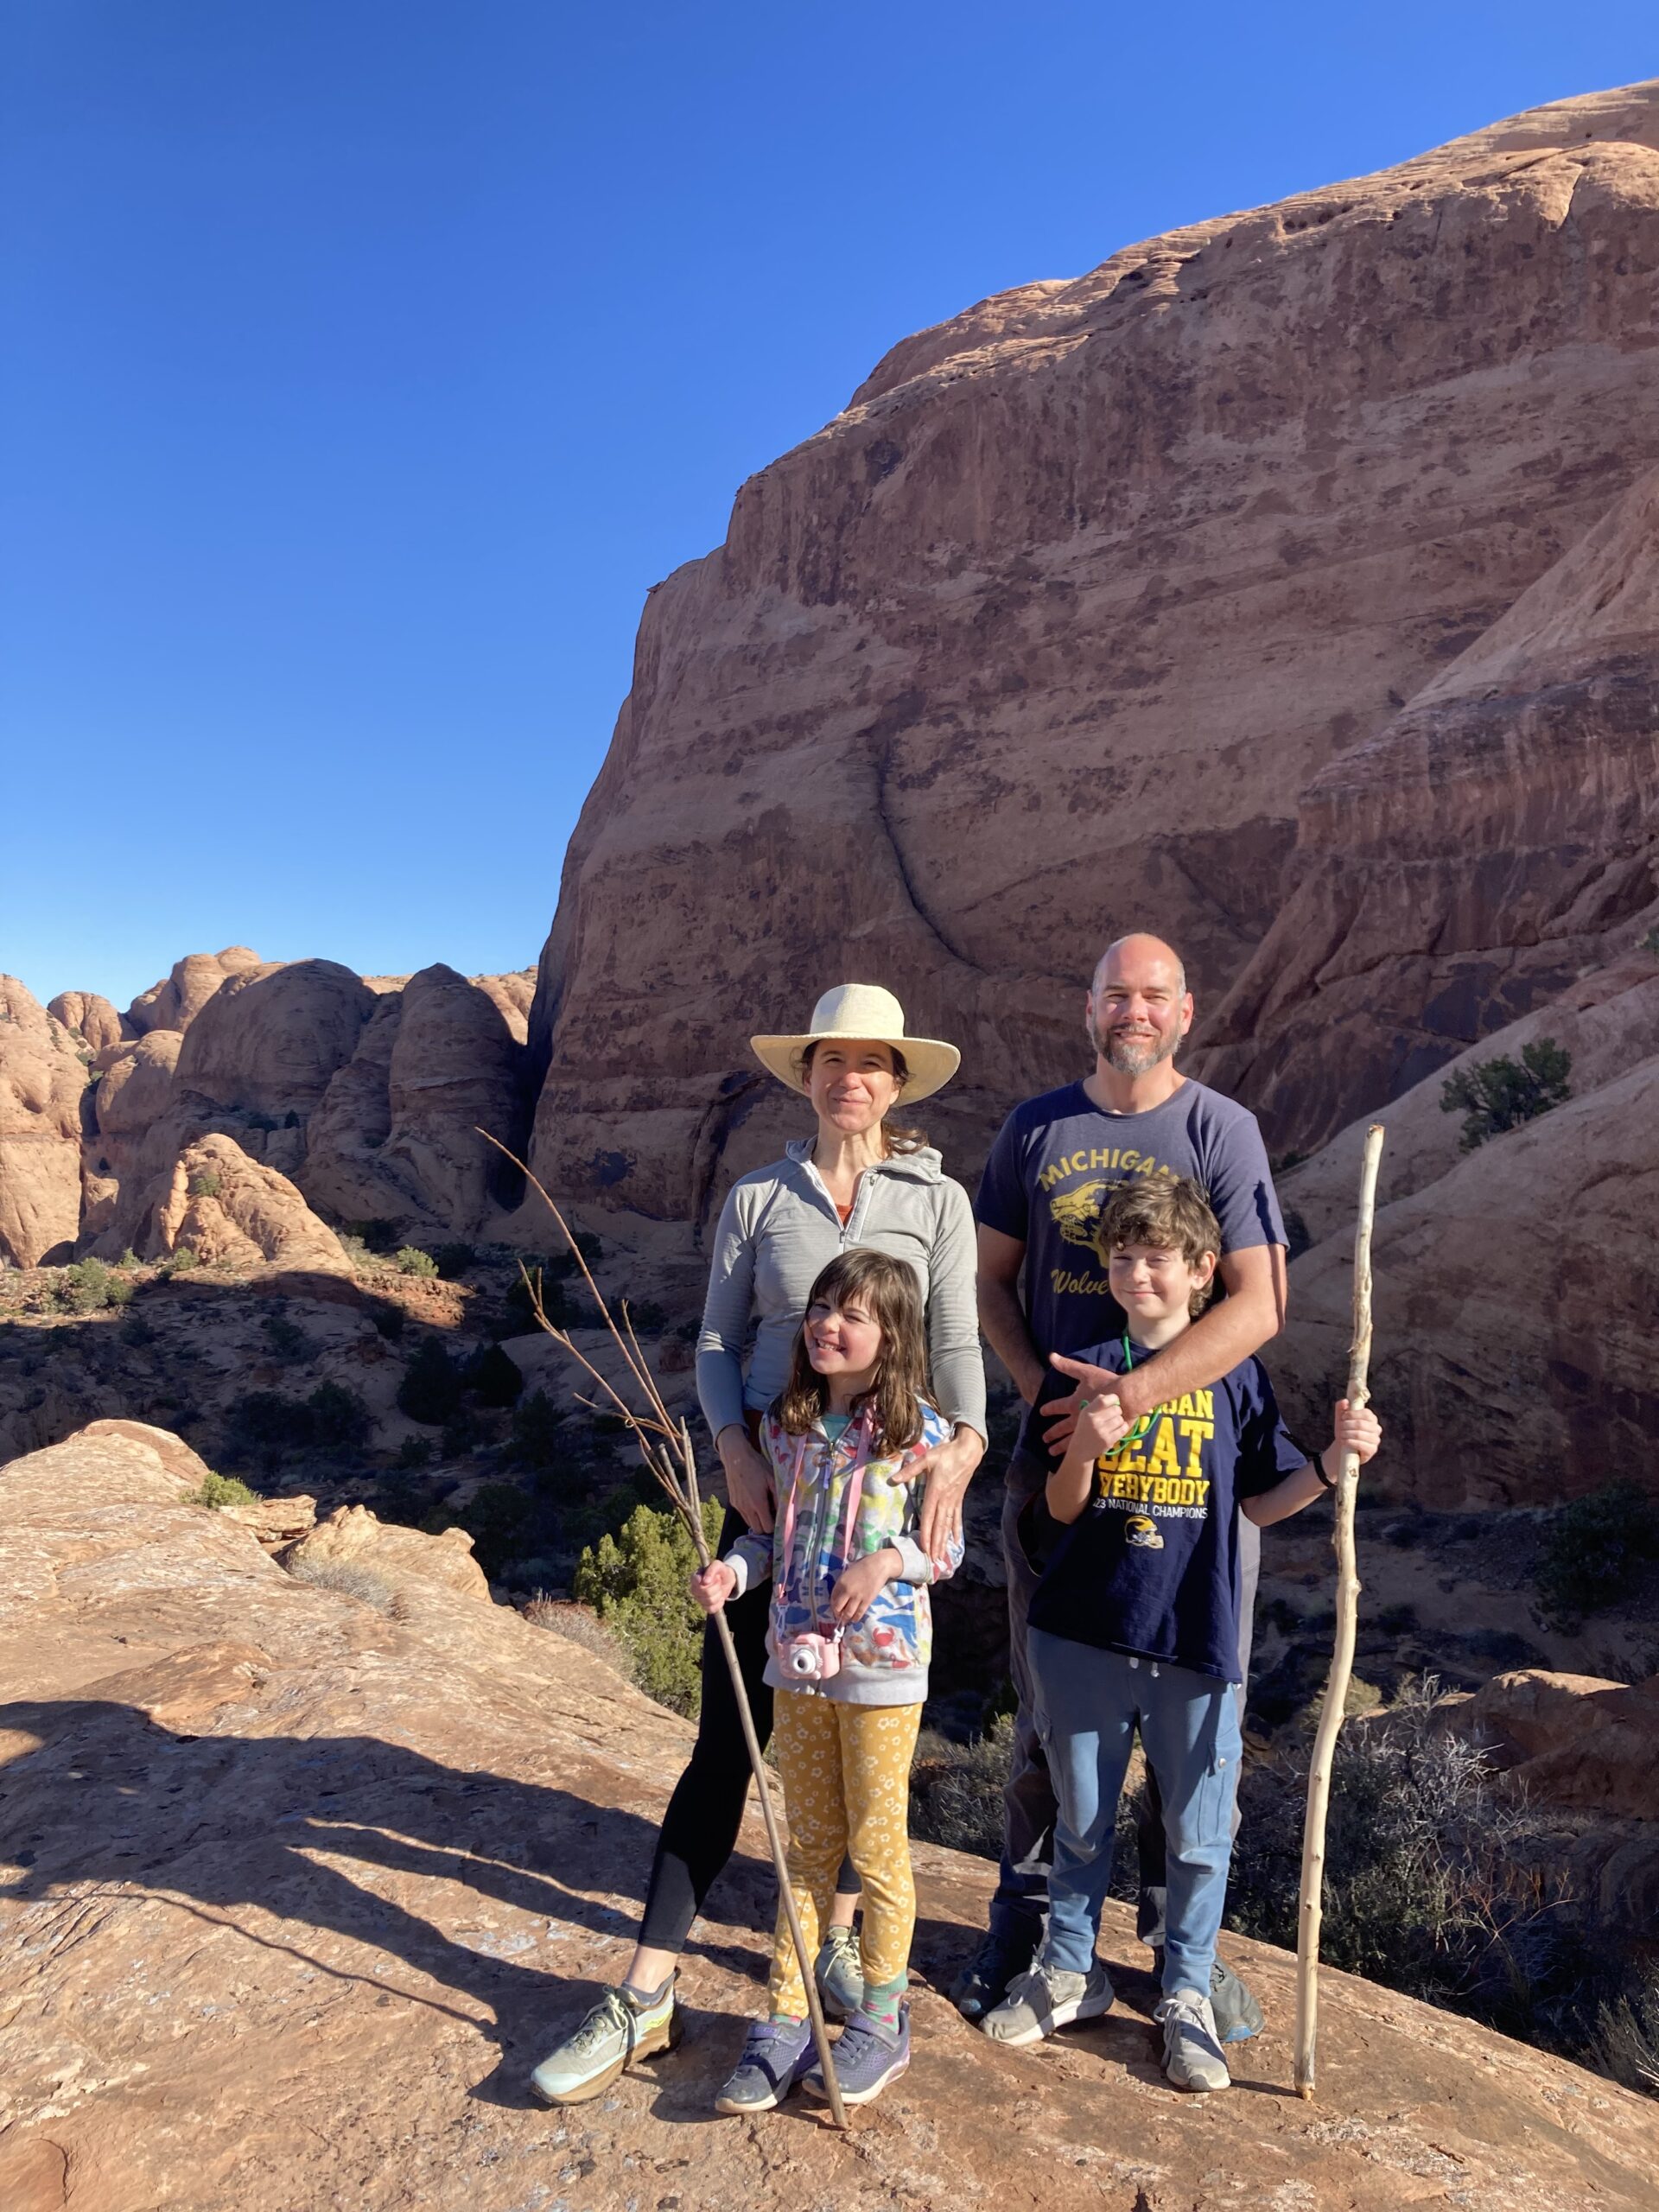 The Wakild family stopped for a photo to show their Michigan pride during a hiking journey through Mill Creek Canyon in Moab, Utah. Susan Wakild, ’69, is behind the camera; her son, Eric Wakild, ’99, and his wife, Emily, are in the back row; and grandchildren Charlotte and Ray stand in front.